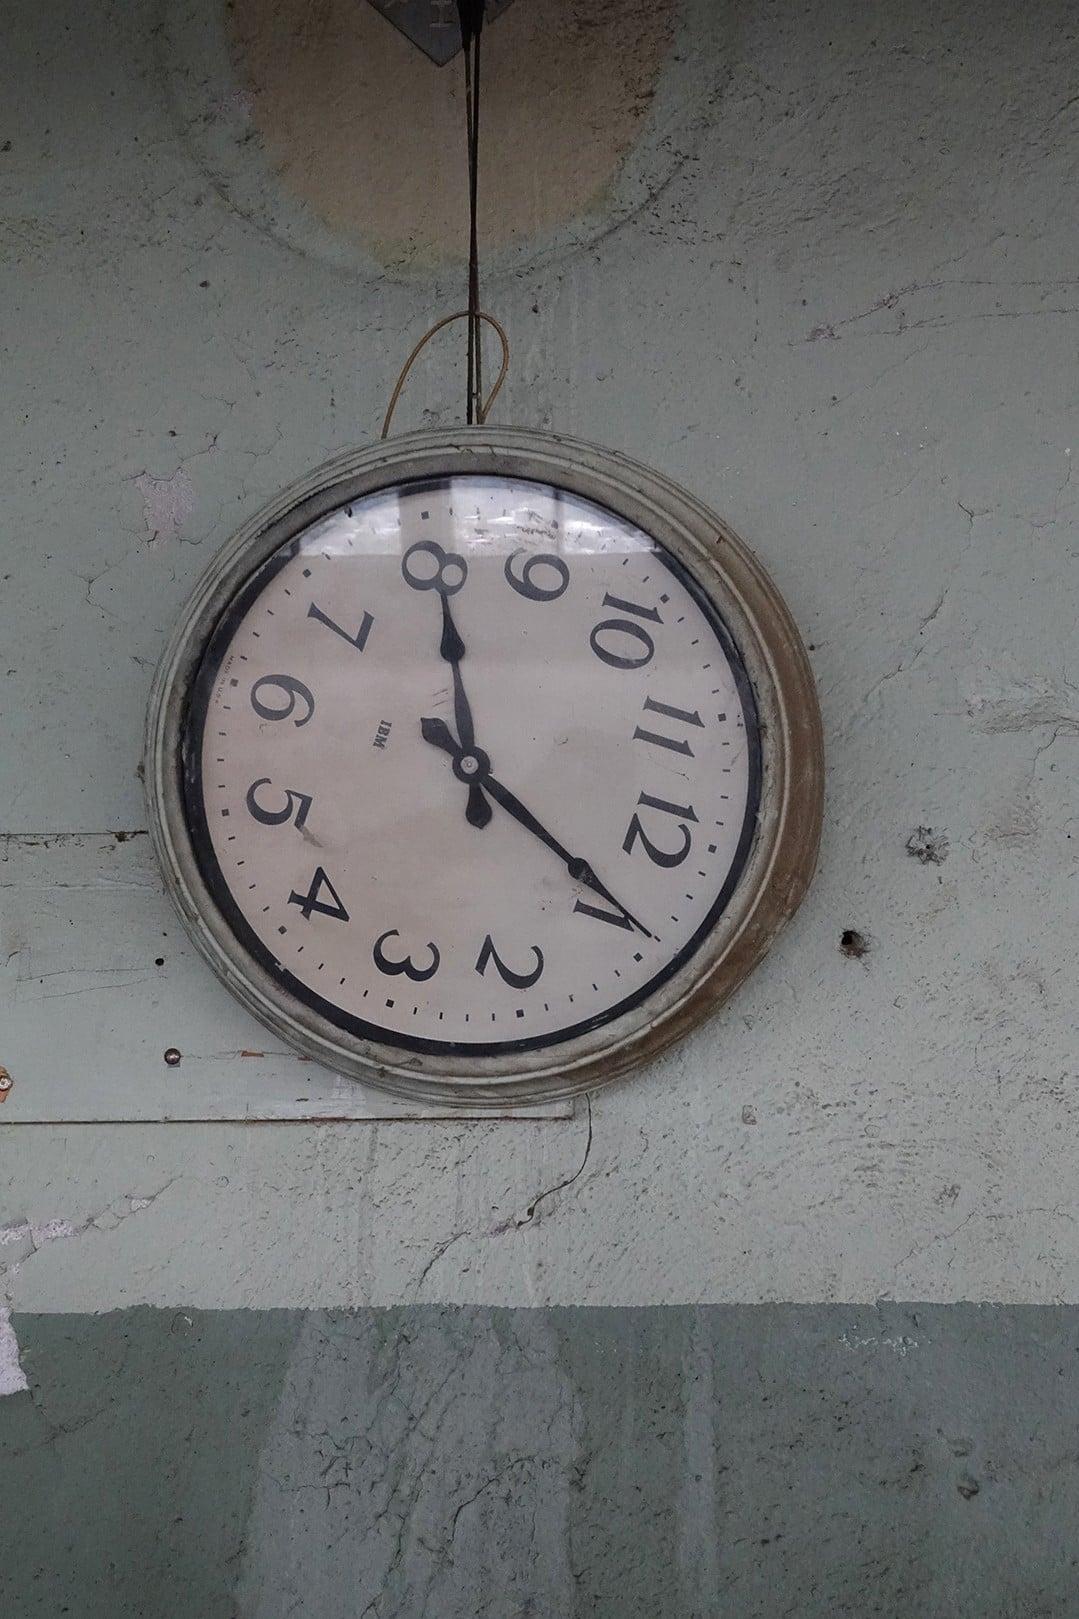 Robin Botie of Ithaca, New York, photographs a clock that ran out of time.